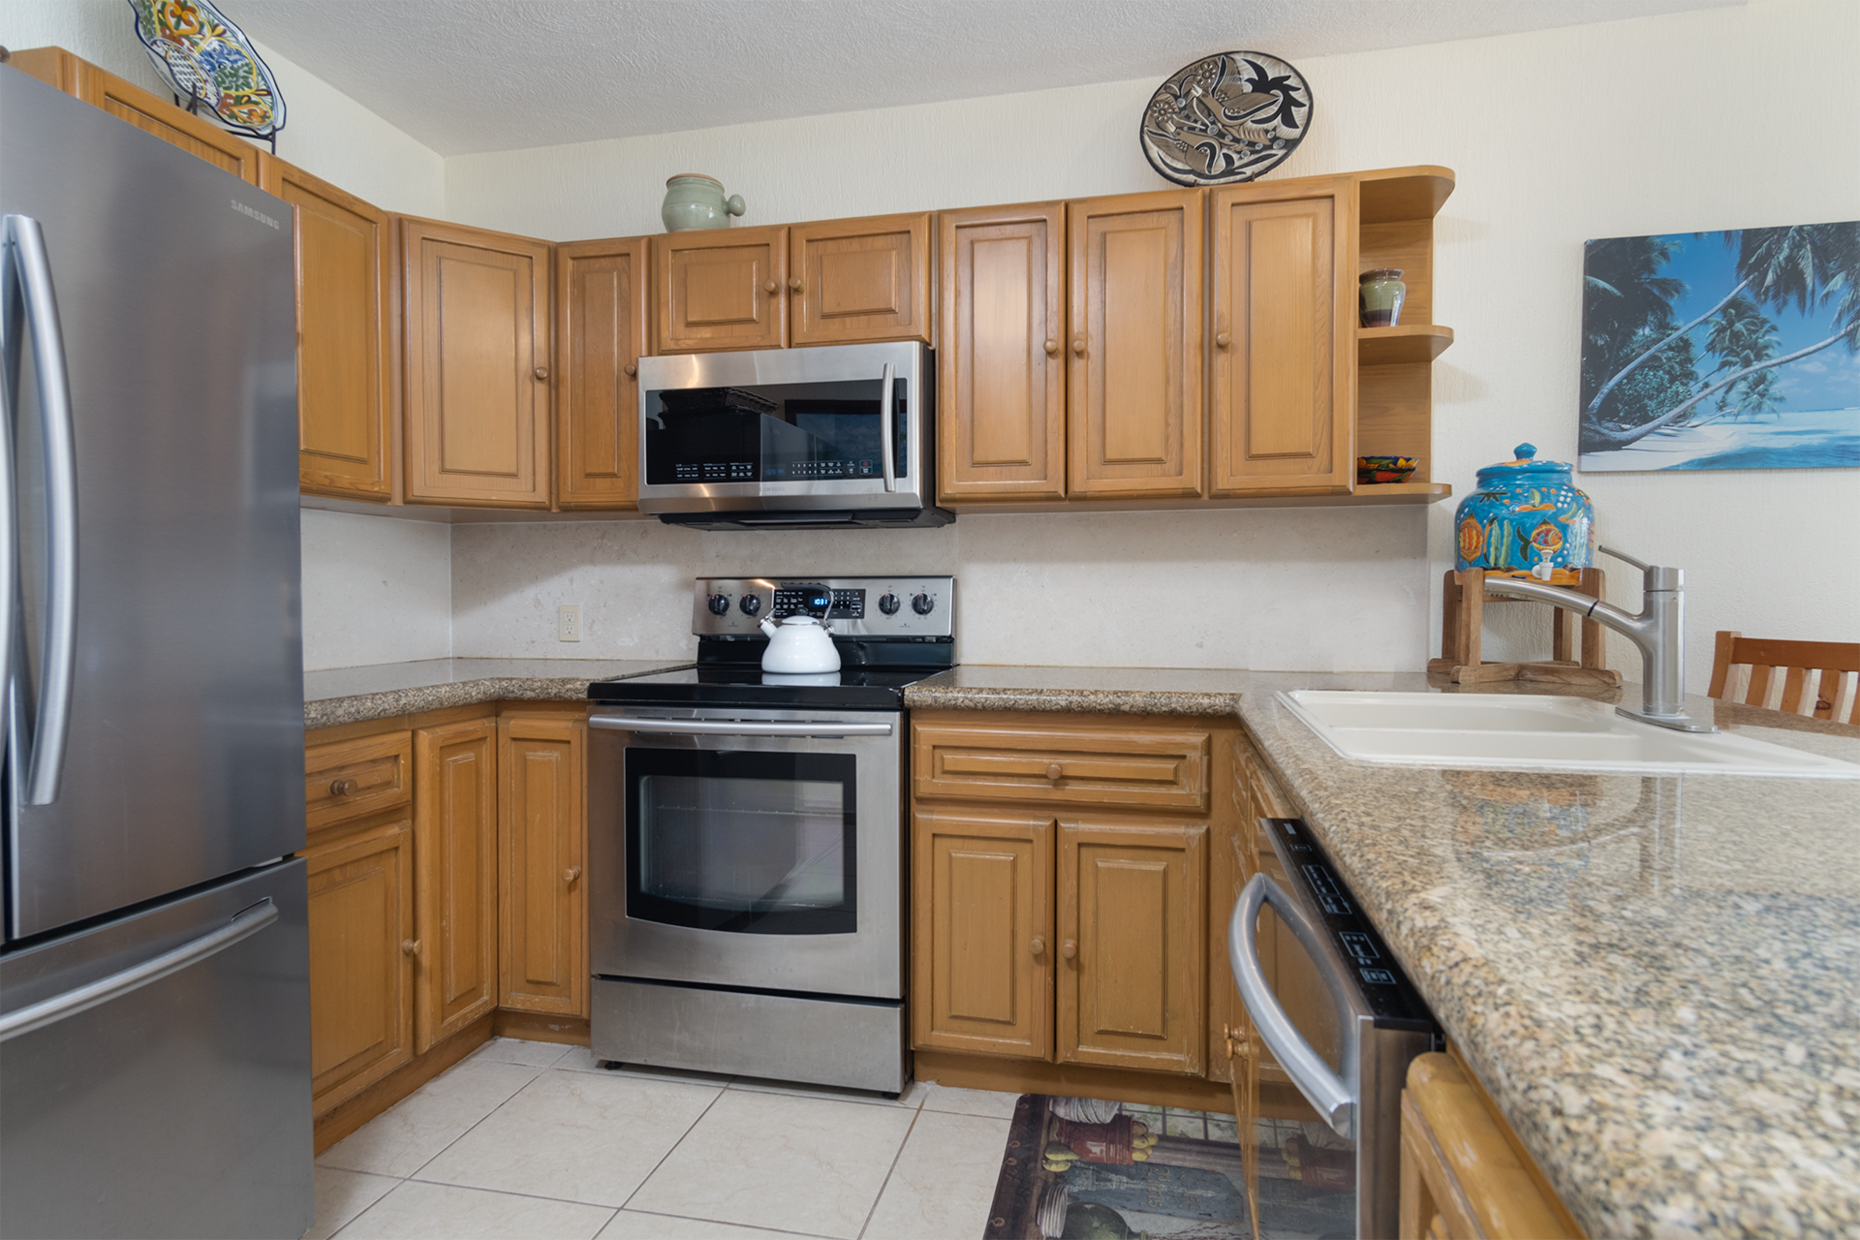 The kitchen with cabinets and appliances.